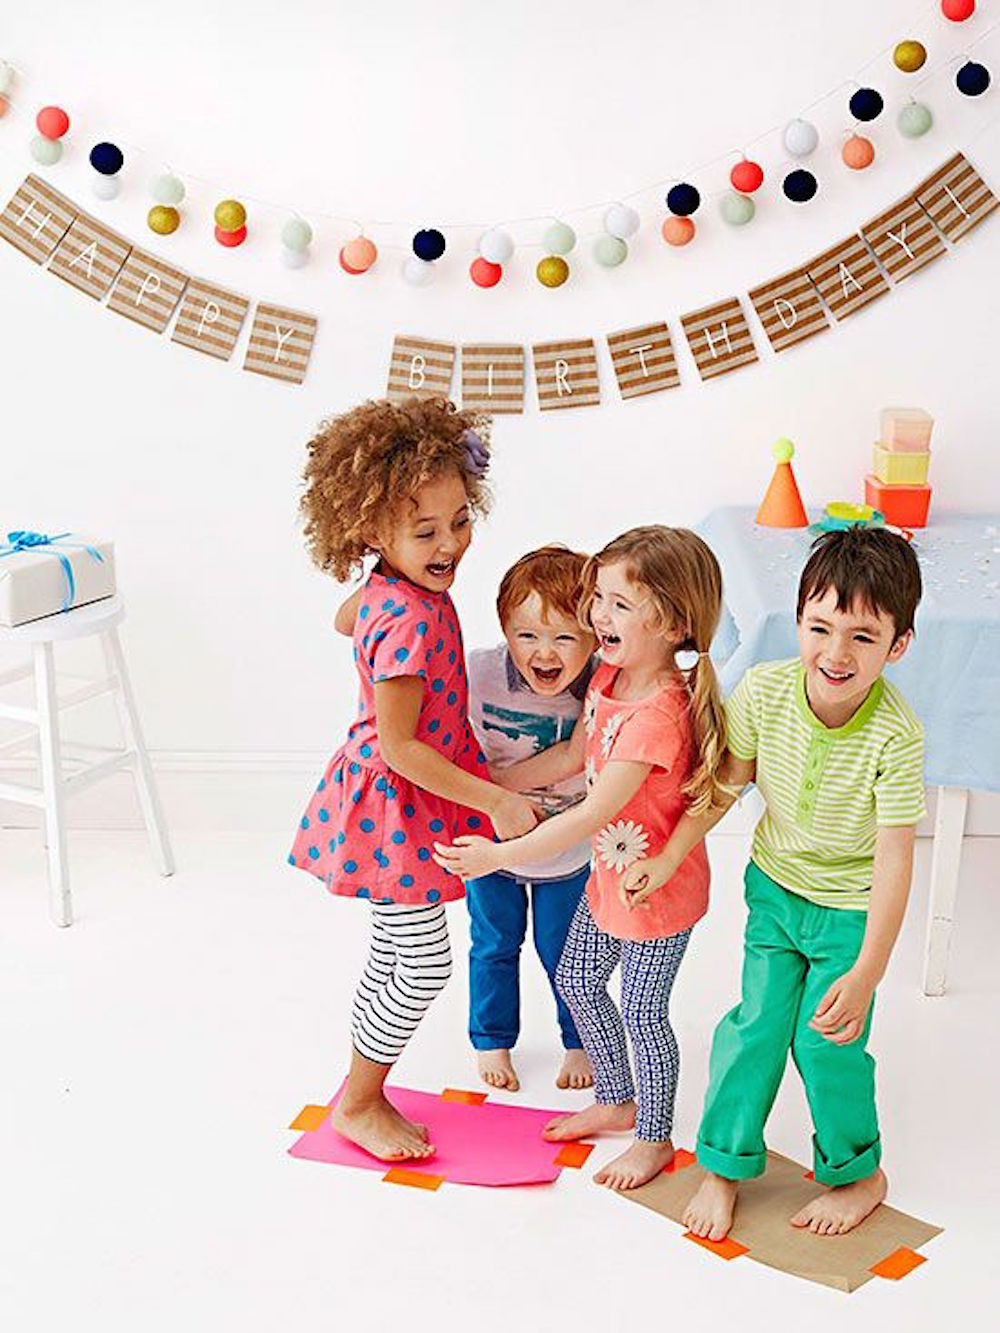 Games For Kids Party
 9 WAYS TO SUCCESSFULLY THROW THE MOST COLORFUL KIDS PARTY